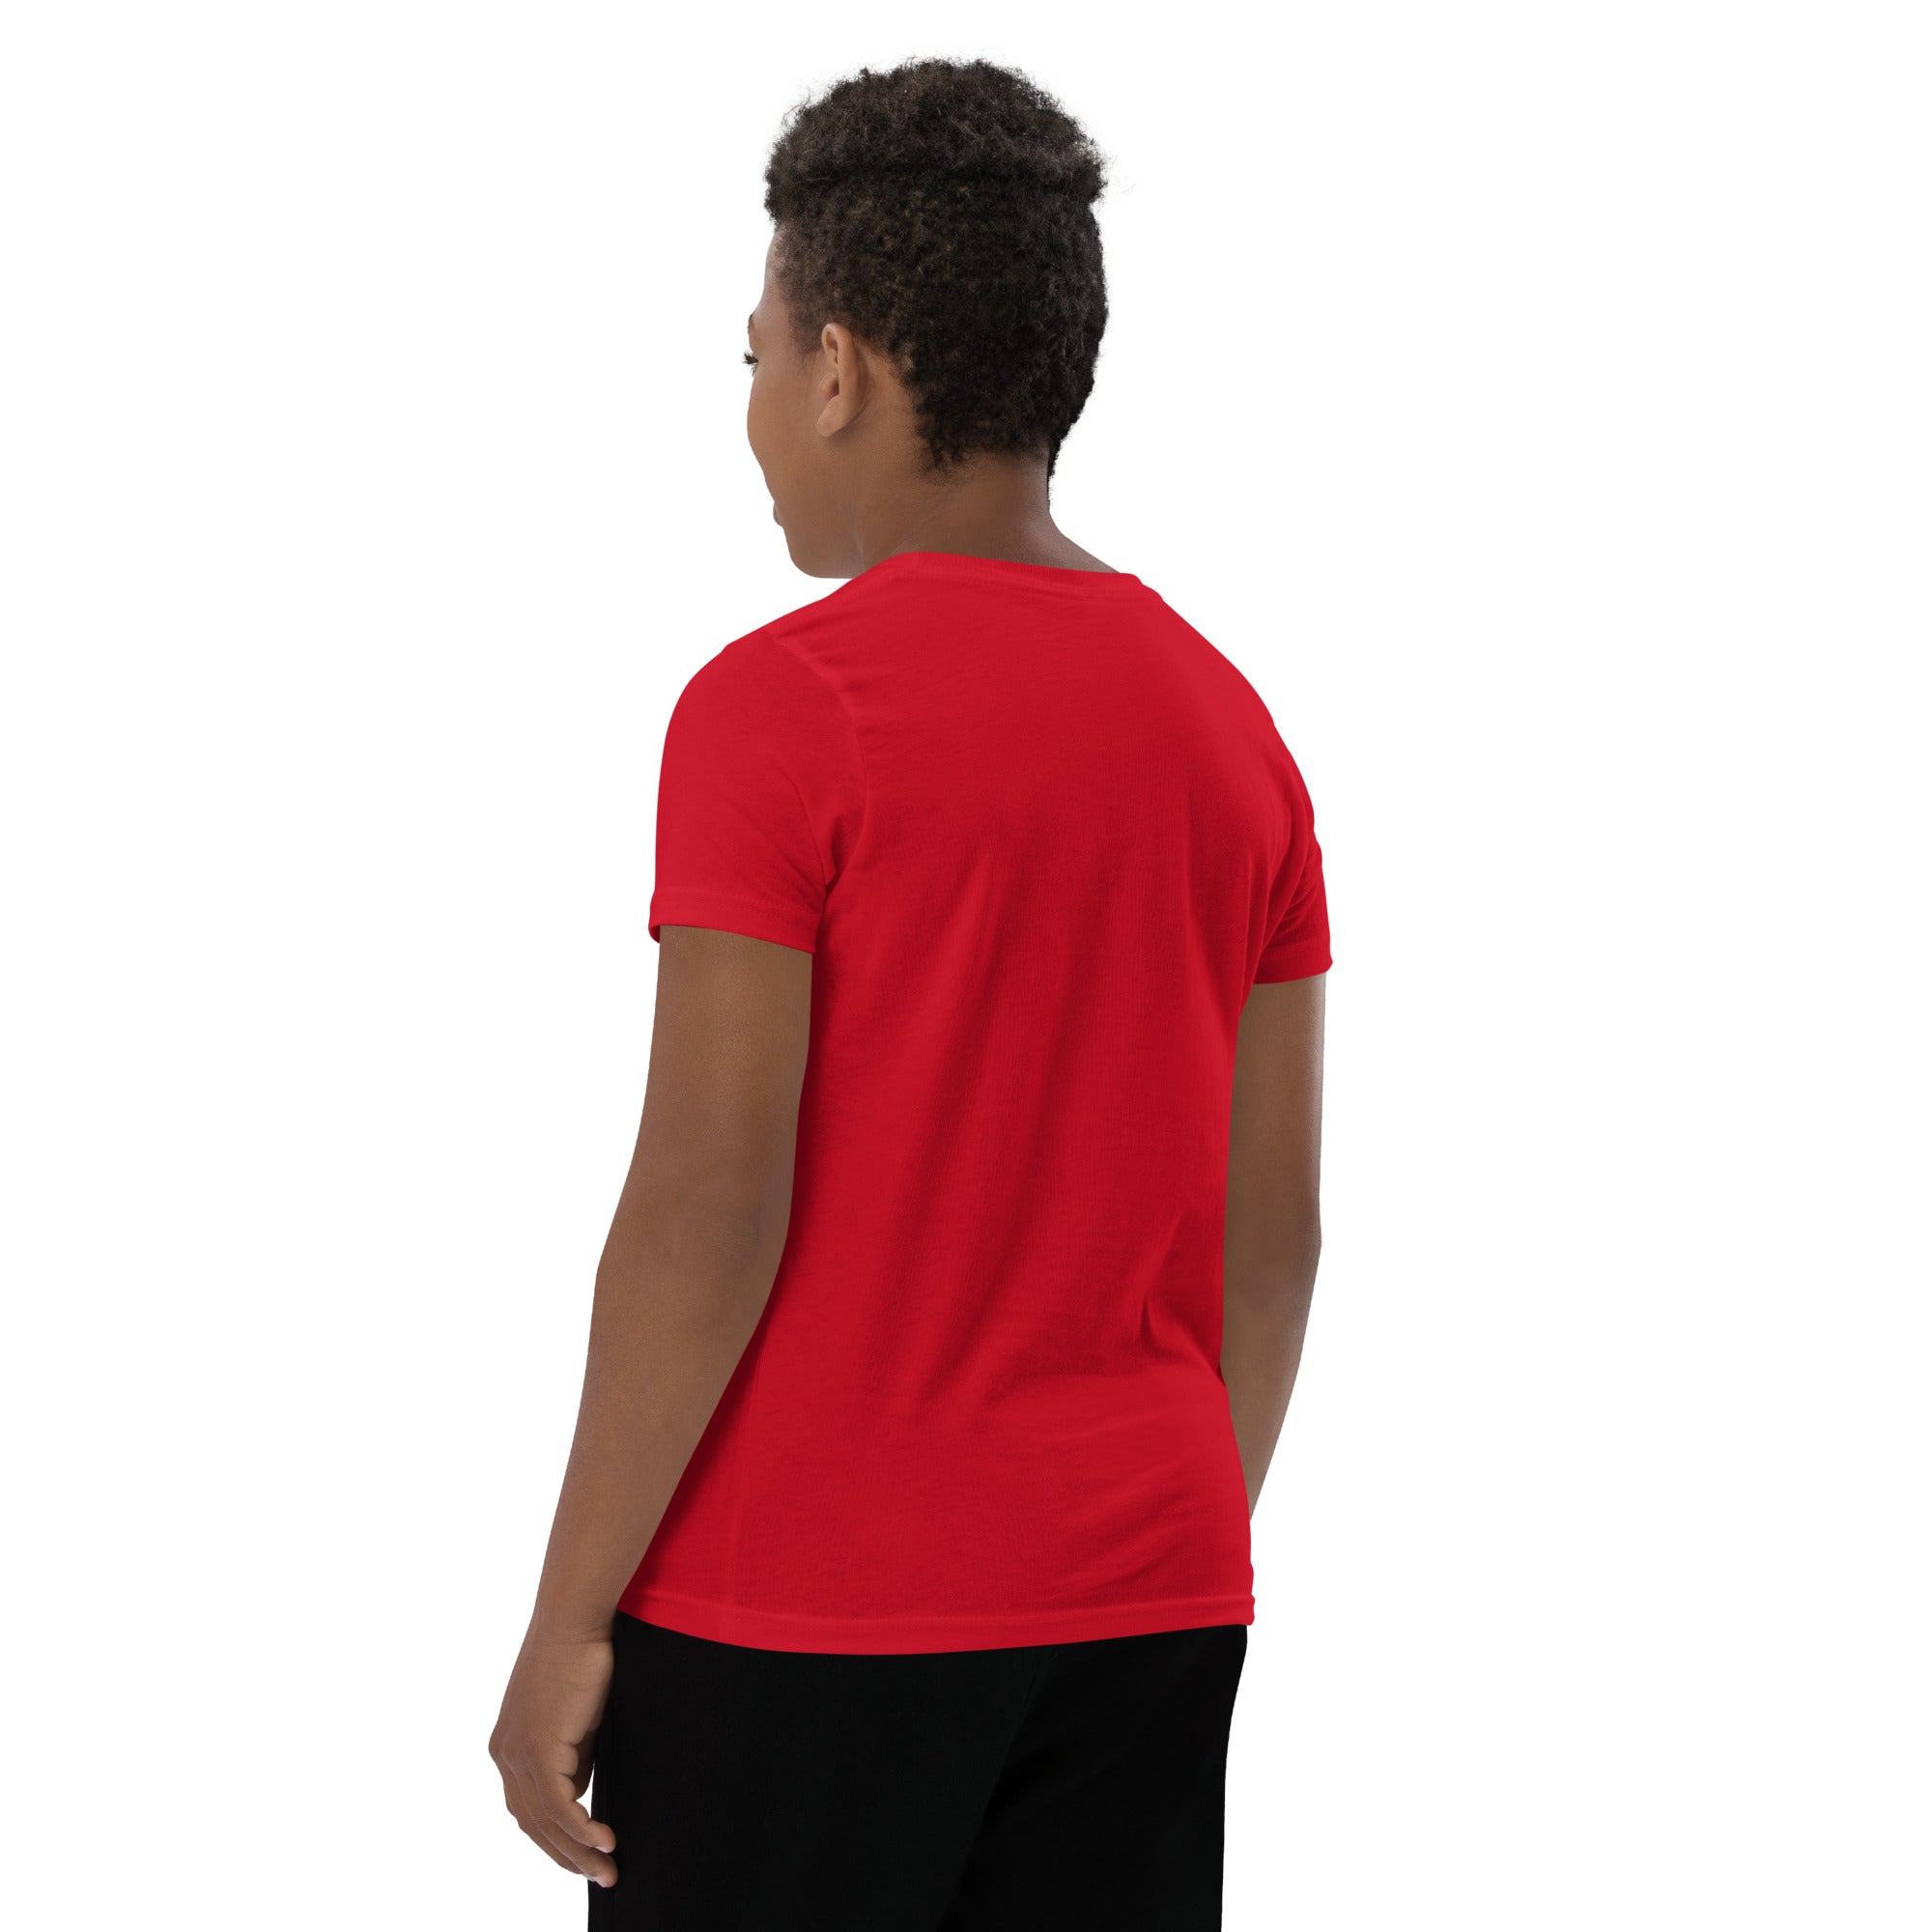 Lee's Summit Logo W - Red Youth Short Sleeve T-Shirt